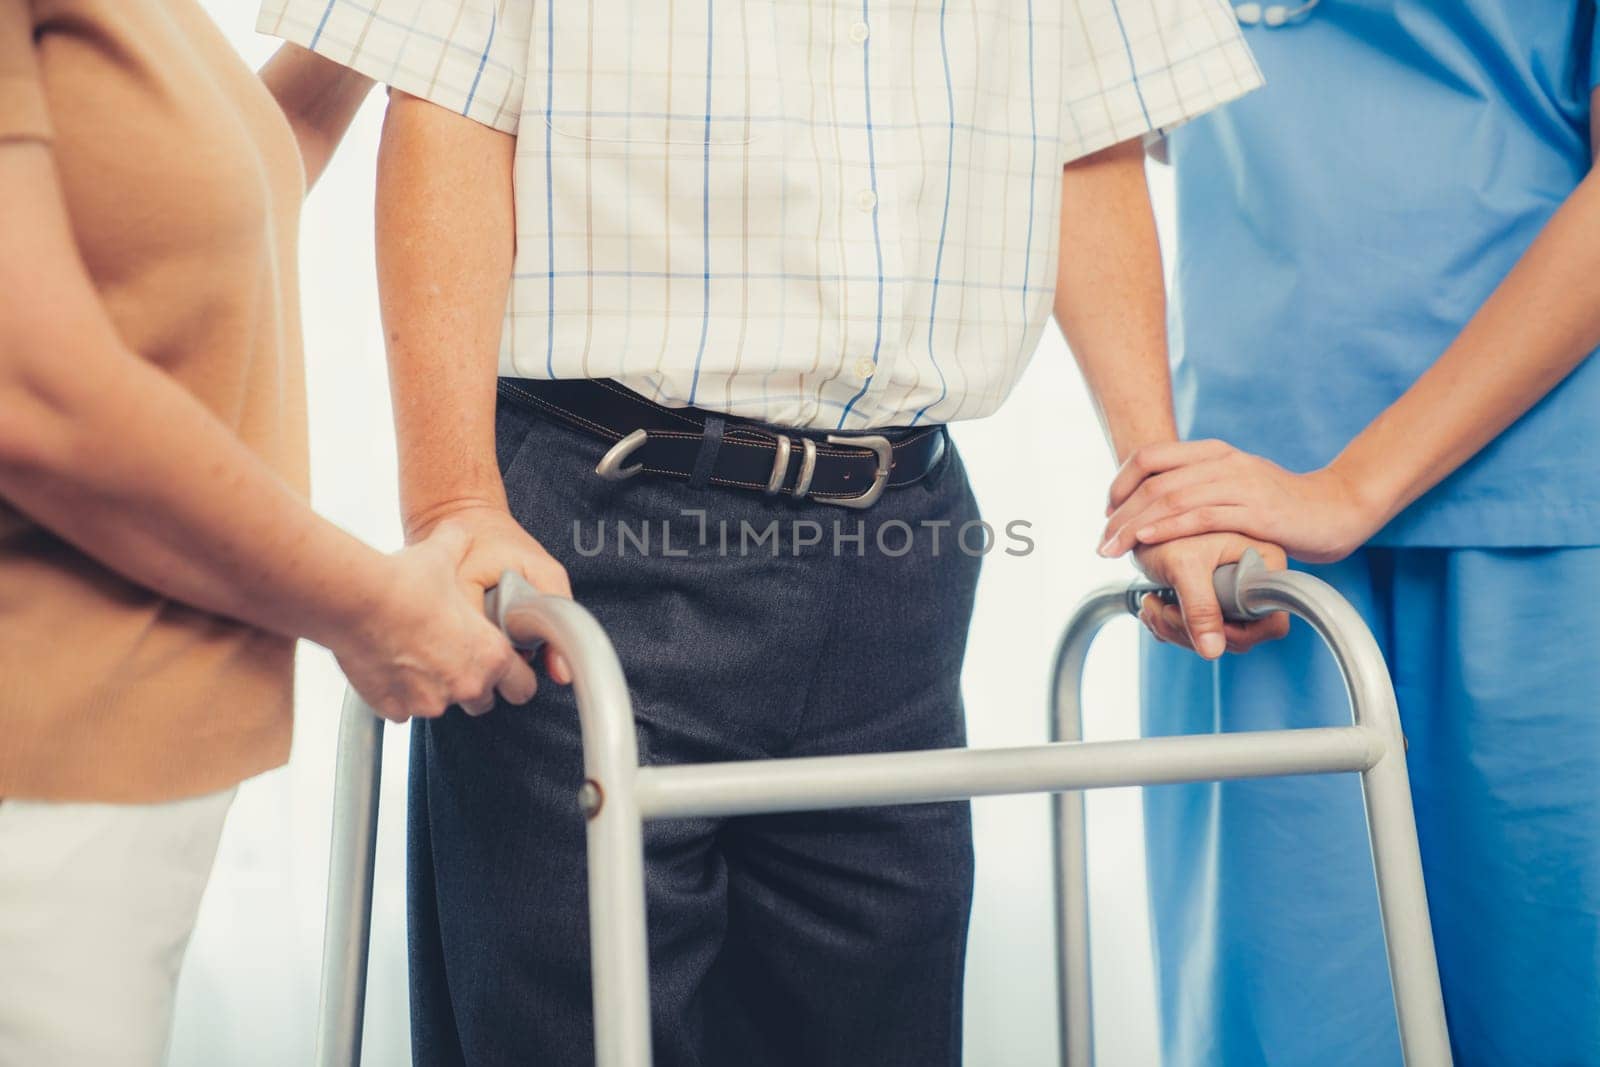 Contented senior man was helped on folding walking by his wife and caregiver. Recuperation for elderly, seniors care, nursing home.